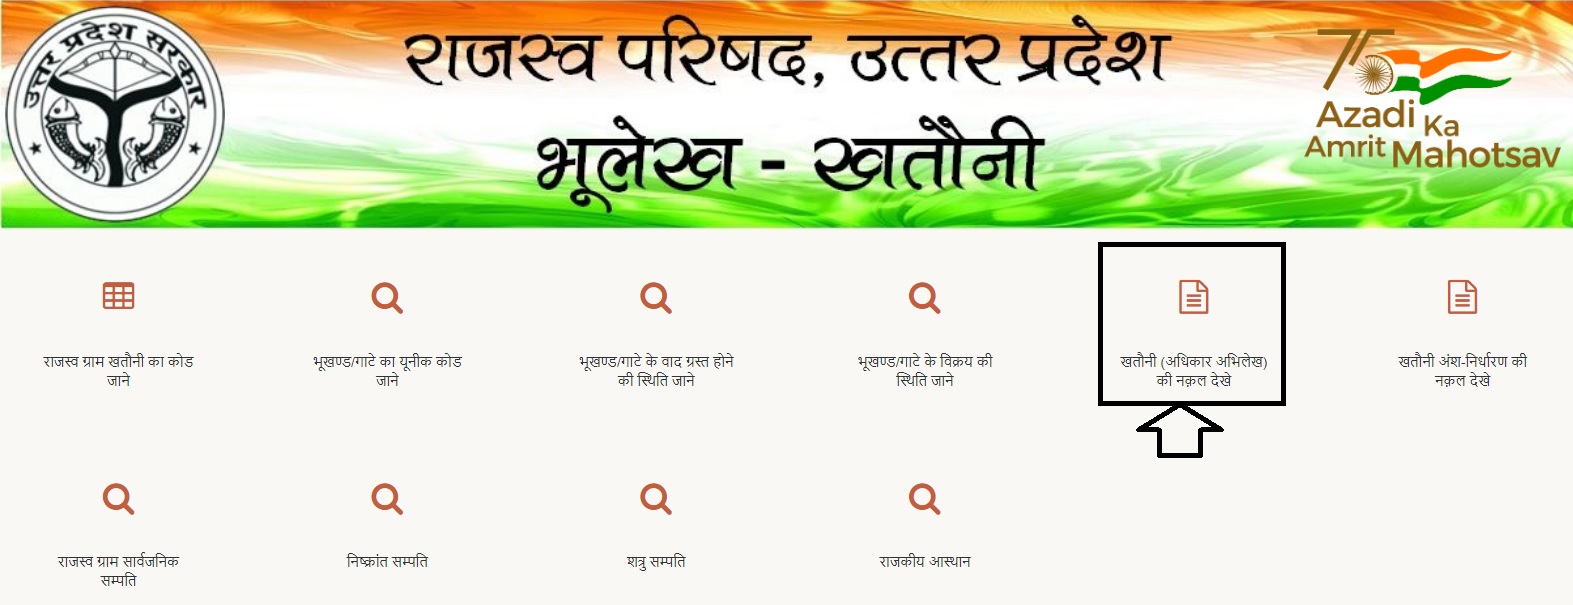 UP Bhulekh Home Page